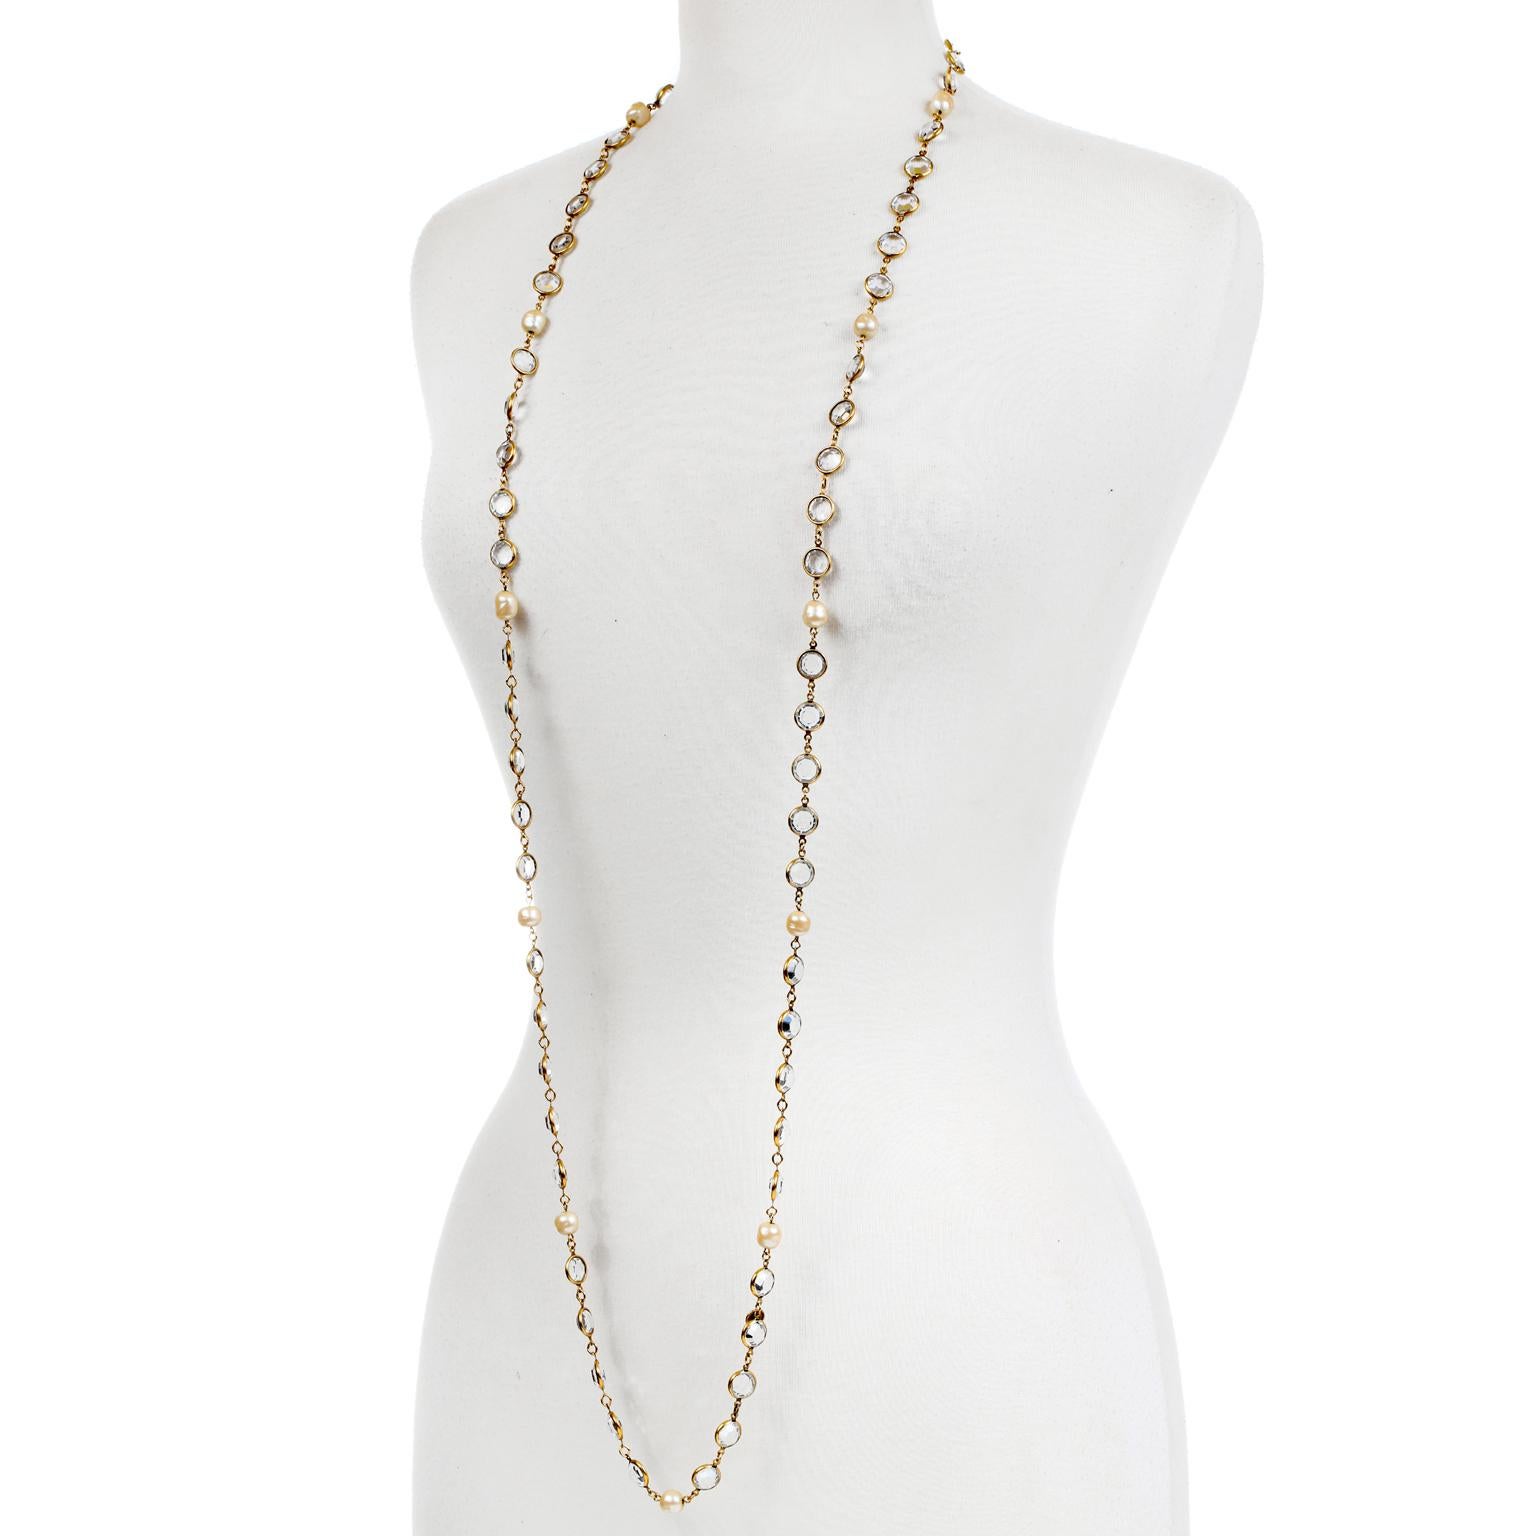 This authentic Chanel Rose Cut Crystal and Pearl Long Necklace is in excellent vintage condition from the 1981 collection.  Gold tone set rose cut crystal beads are linked together on a long necklace.  Interspersed with faux pearls. May be worn